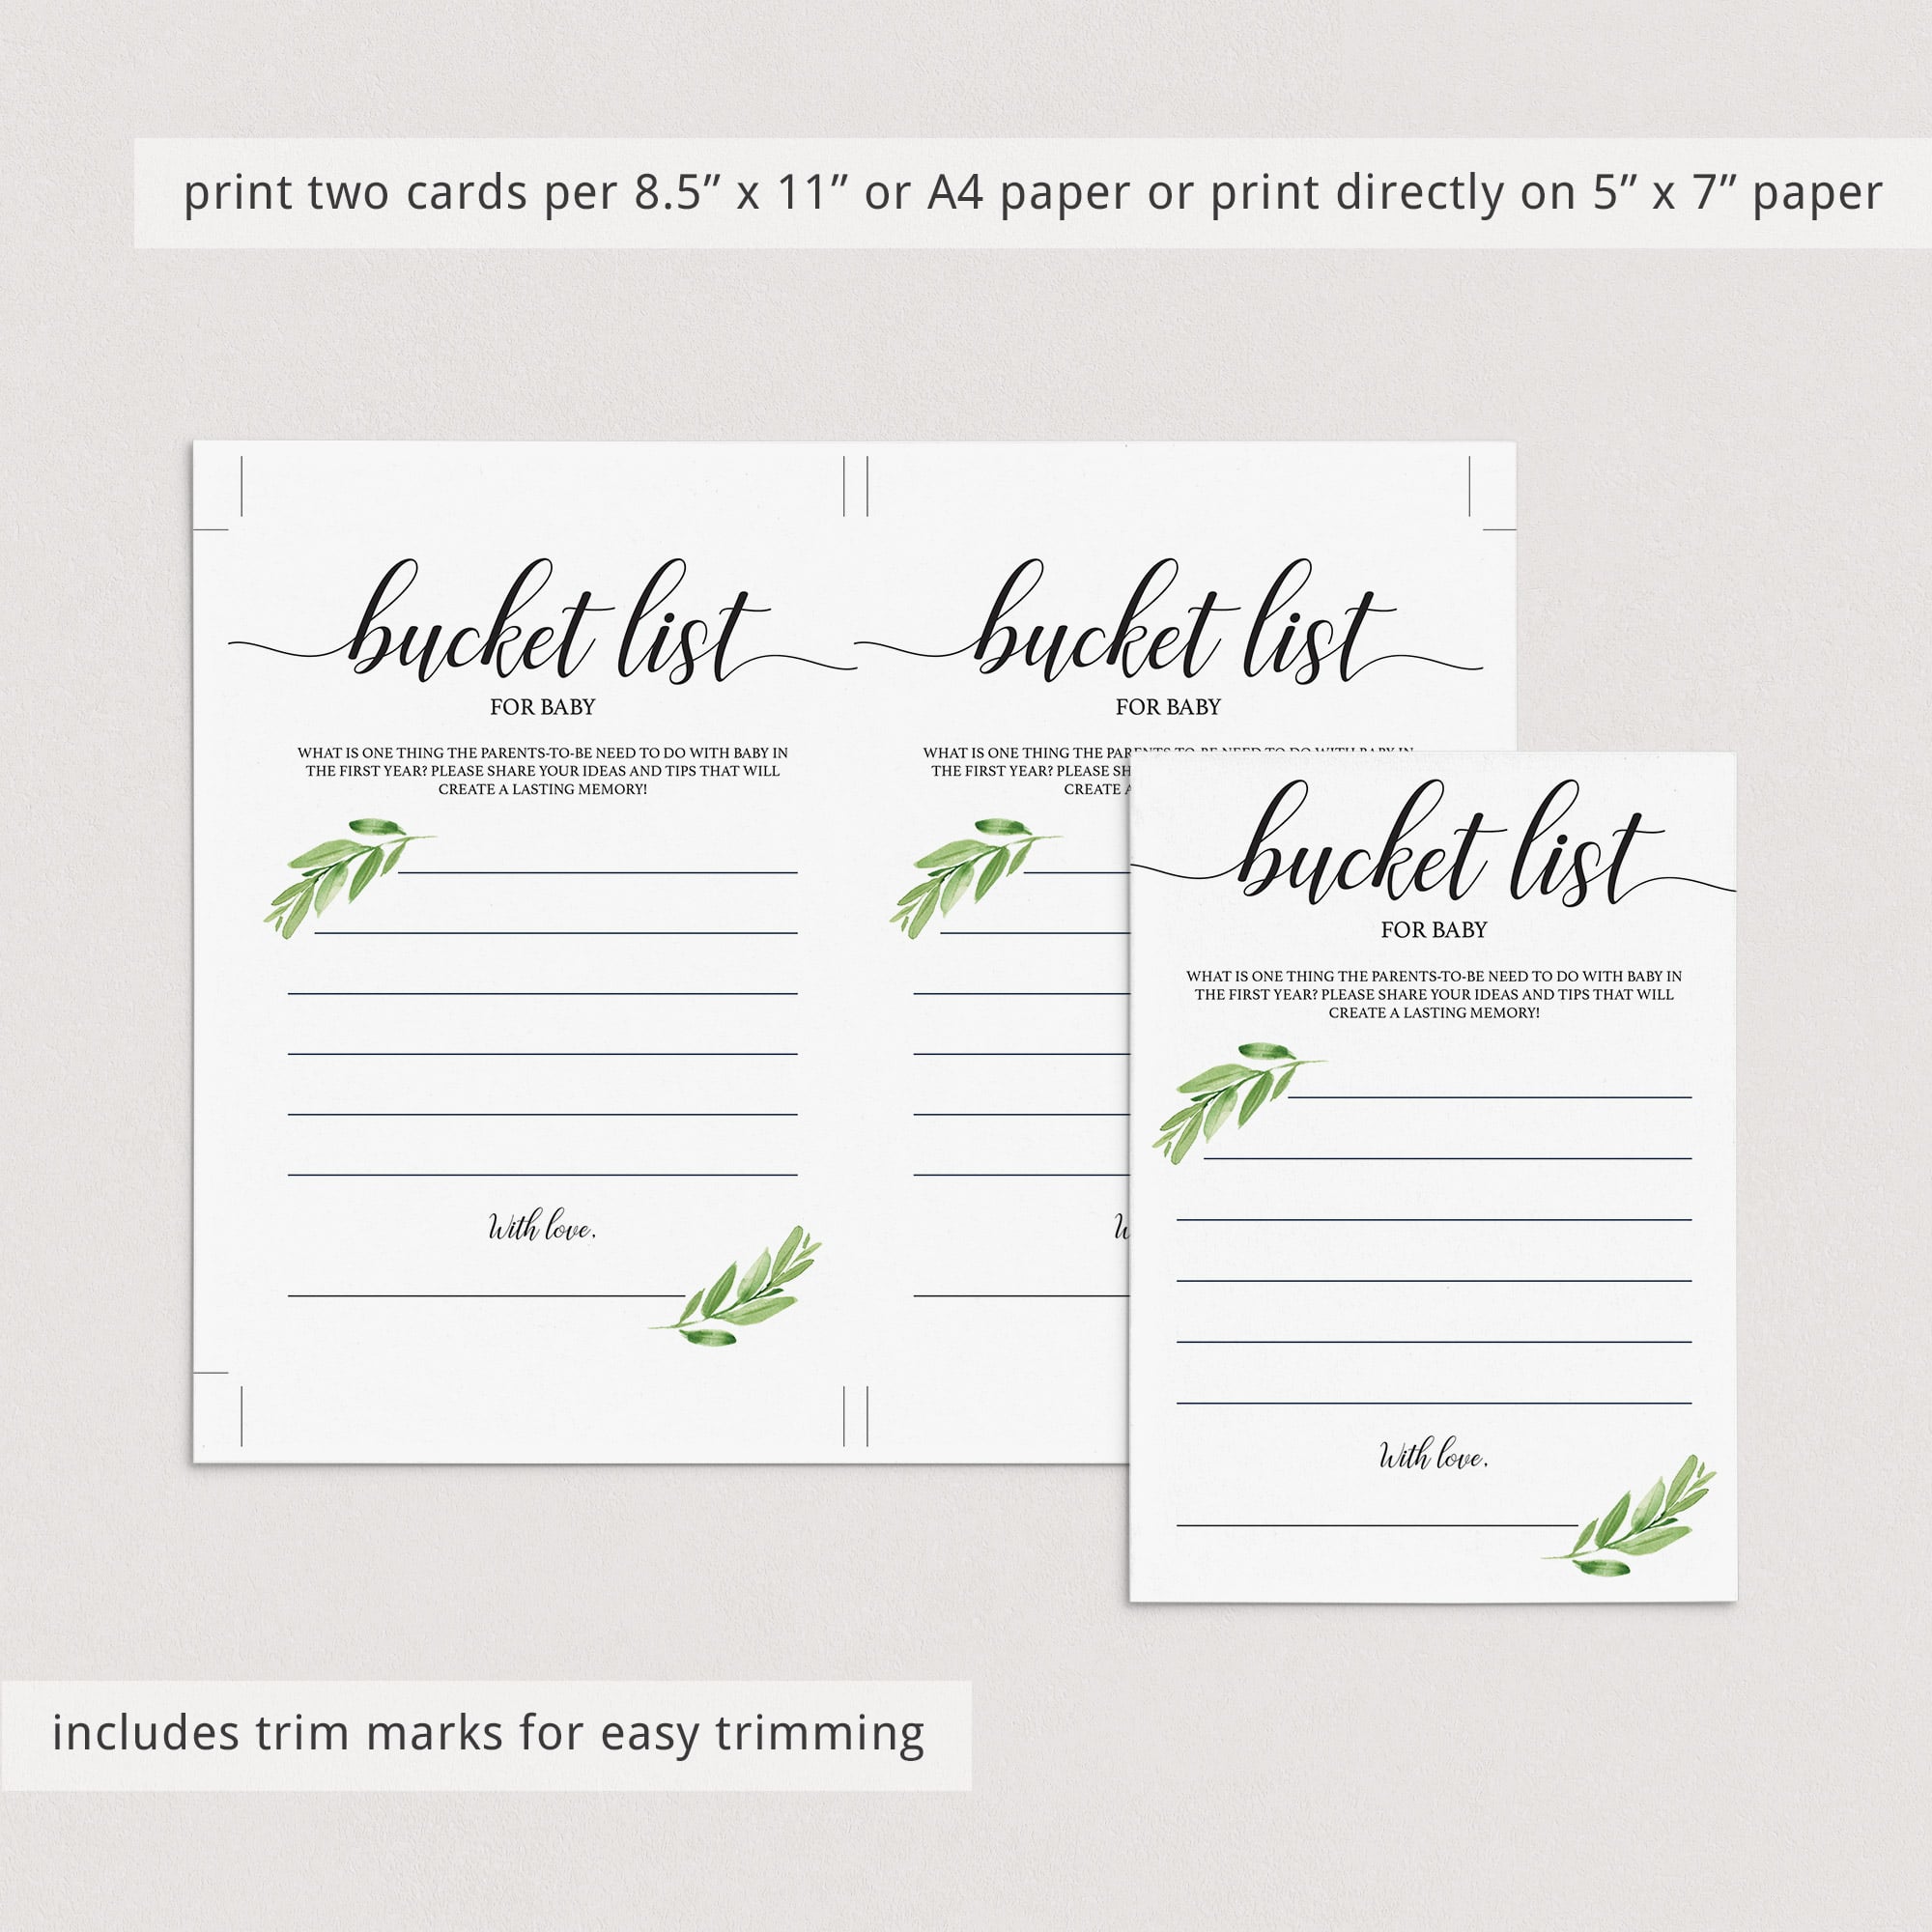 Printable bucket list cards for baby by LittleSizzle